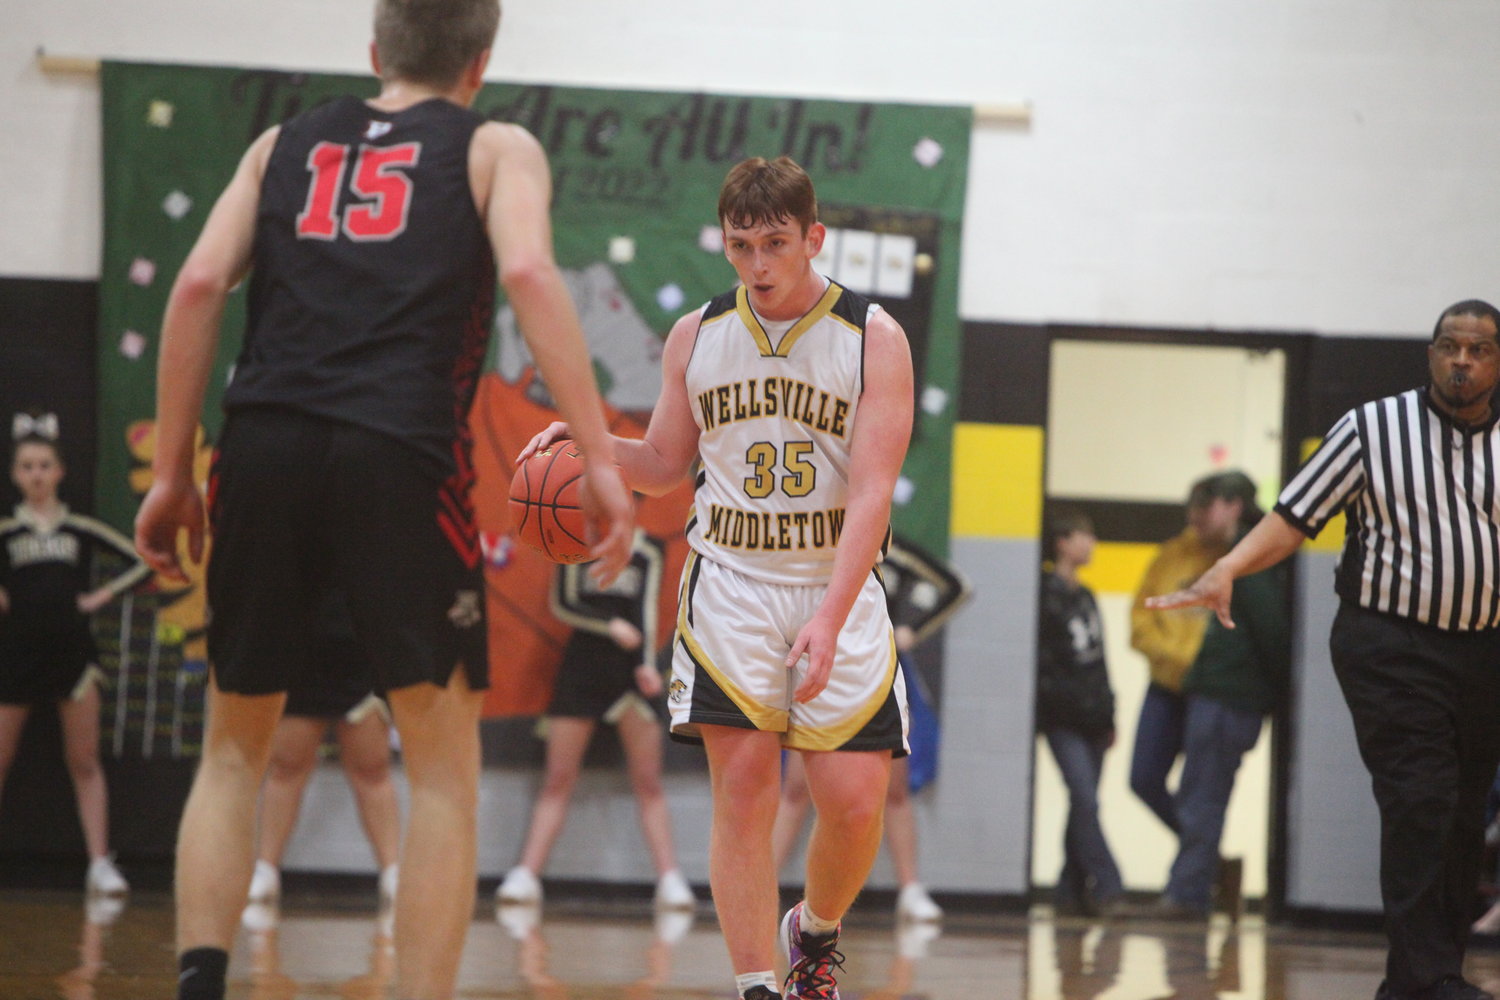 Sophomore Carson Huff is one of nine returning players on this year’s Wellsville-Middletown boys basketball team. Huff and the Tigers start their season at 7:30 p.m. on Nov. 22 with a road game against Community R-6.